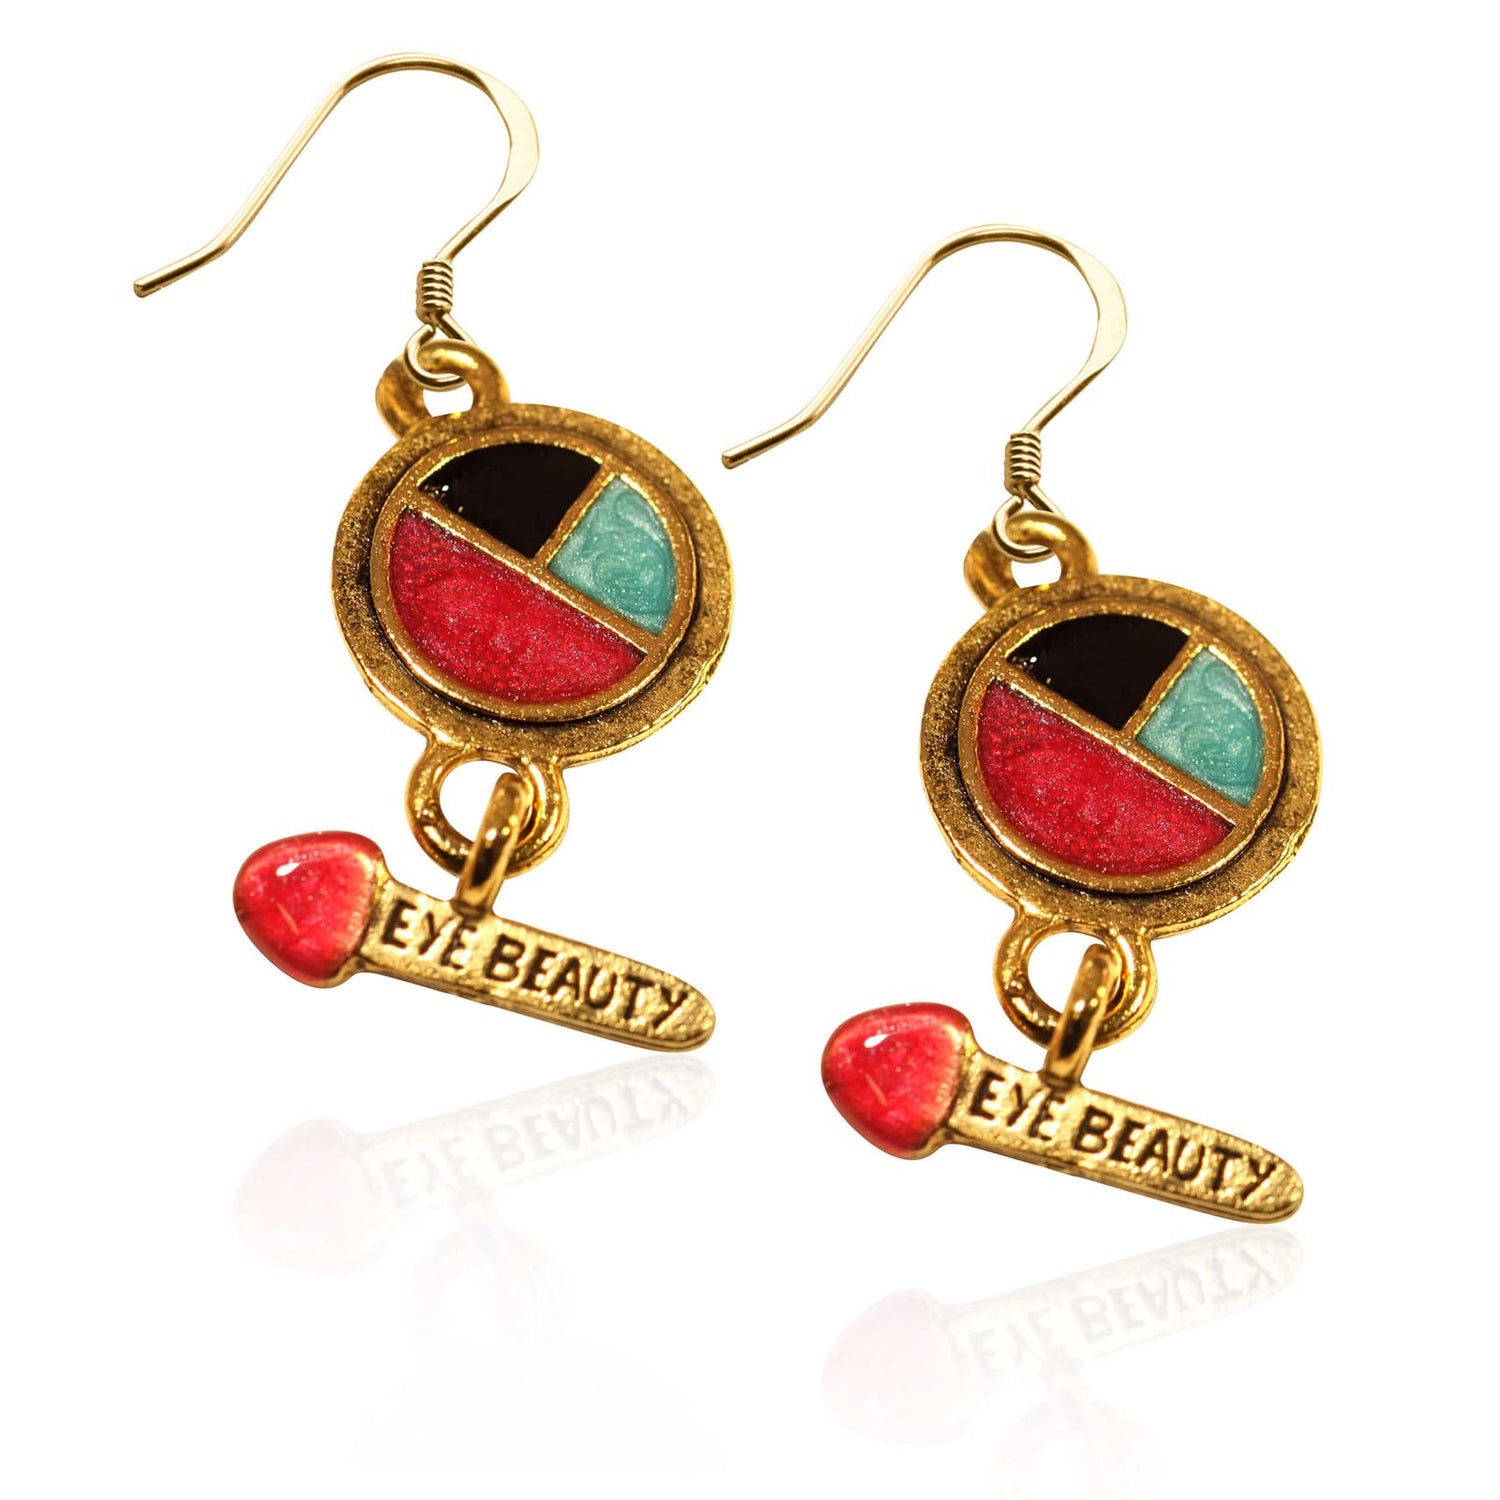 Whimsical Gifts | Eye Shadow & Brush Charm Earrings in Gold Finish | Professions Themed | Salon & Spa Professions | Jewelry